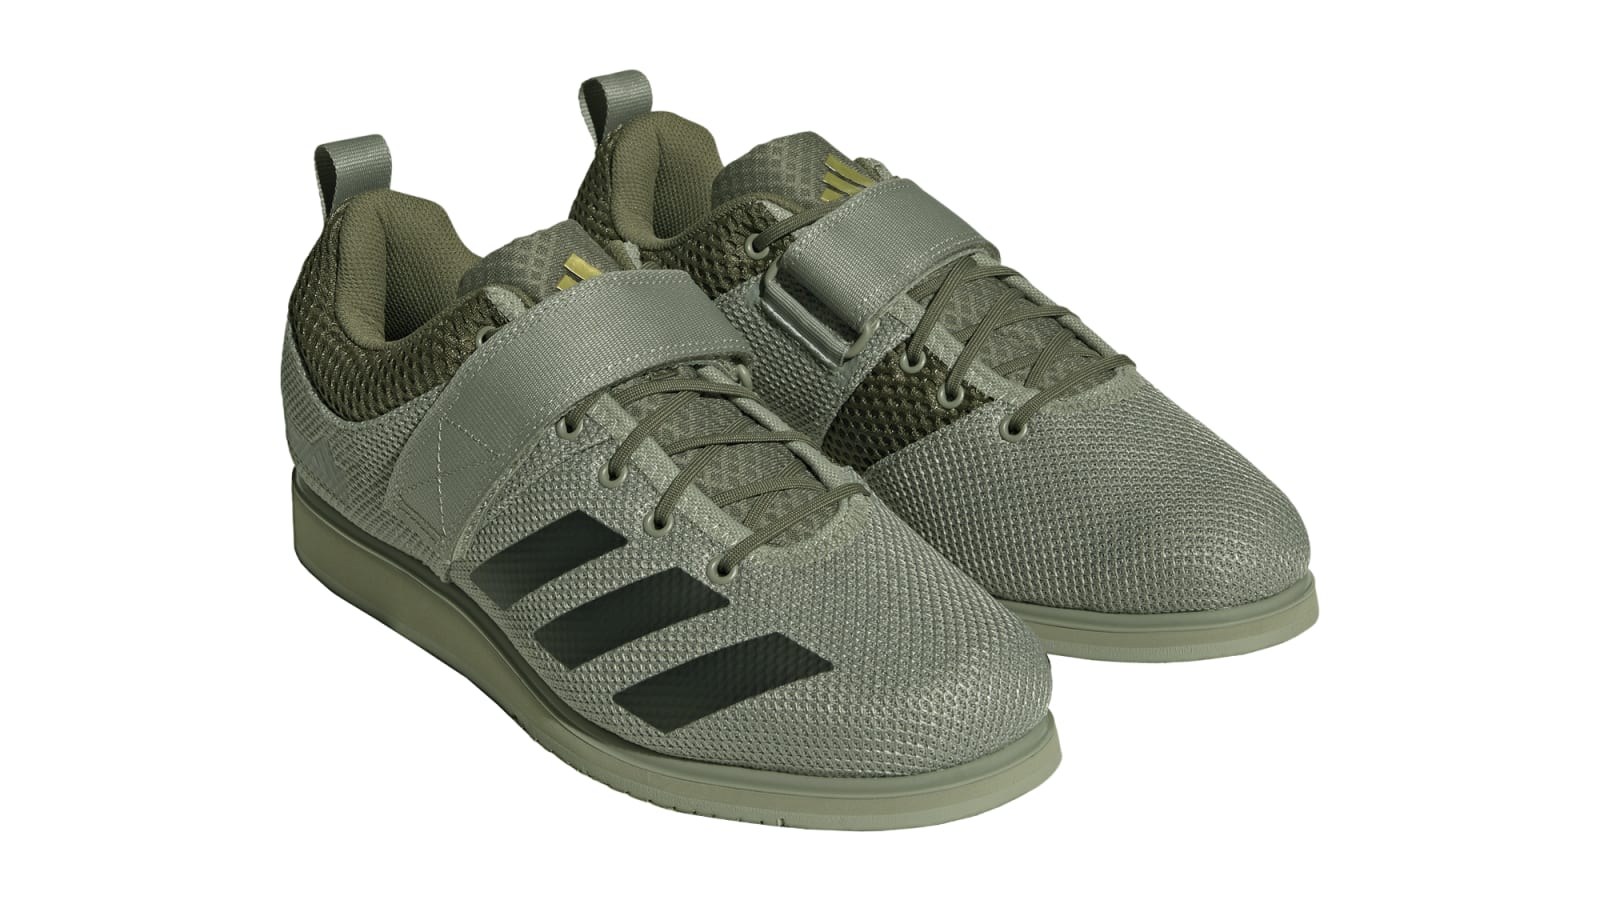 Adidas Powerlift 5 Weightlifting Shoes Silver Pebble Core / Olive Strata | Rogue